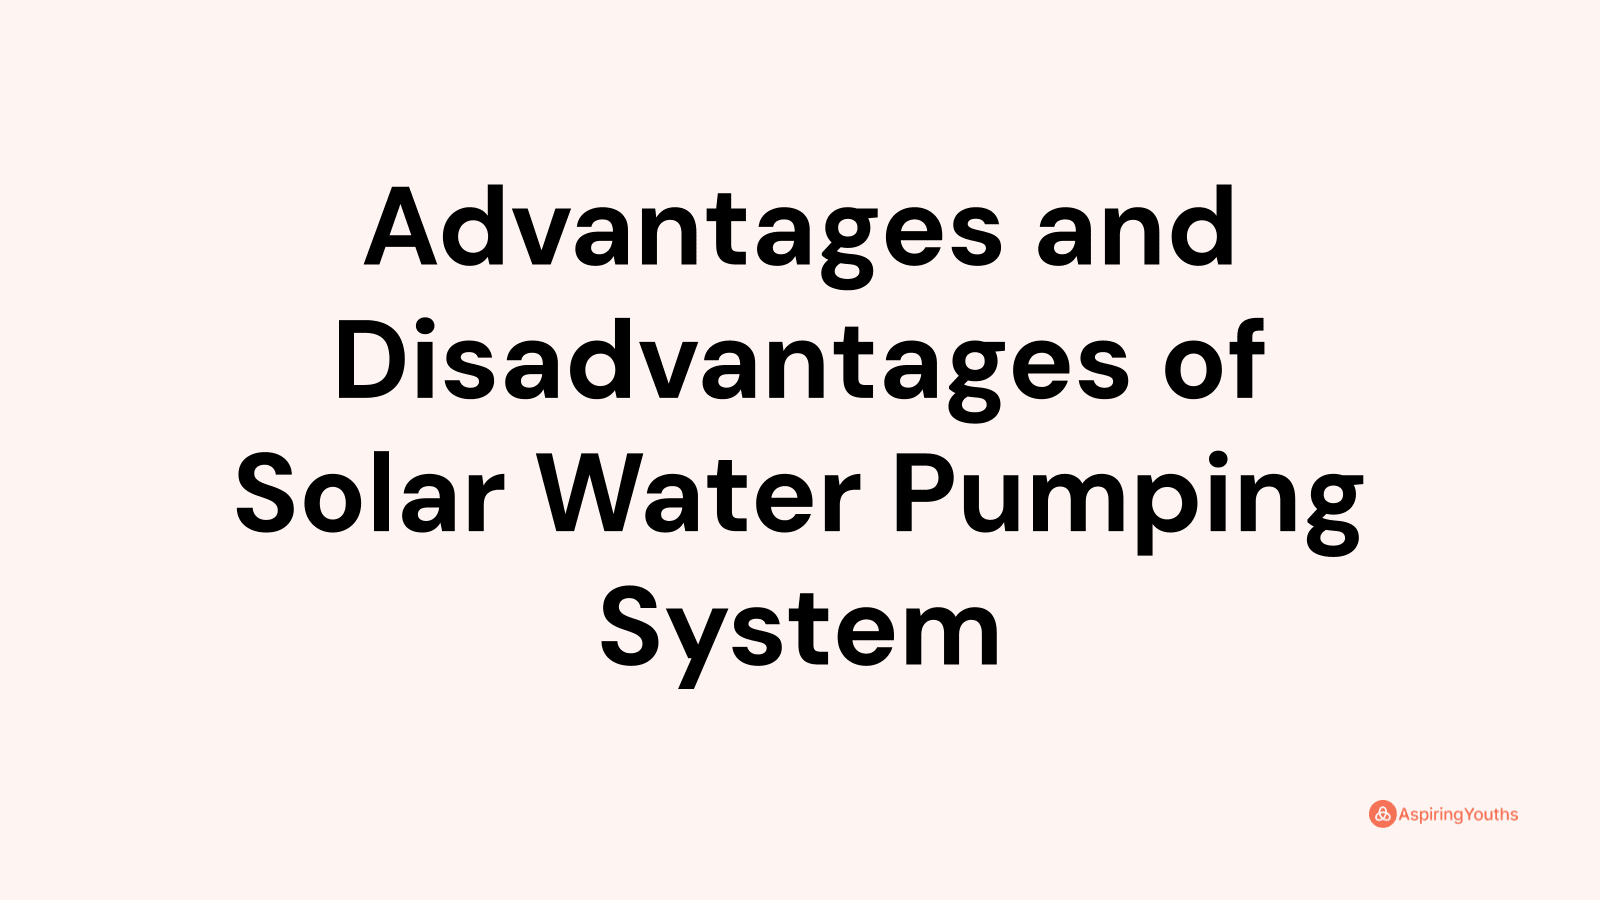 Advantages and disadvantages of Solar Water Pumping System